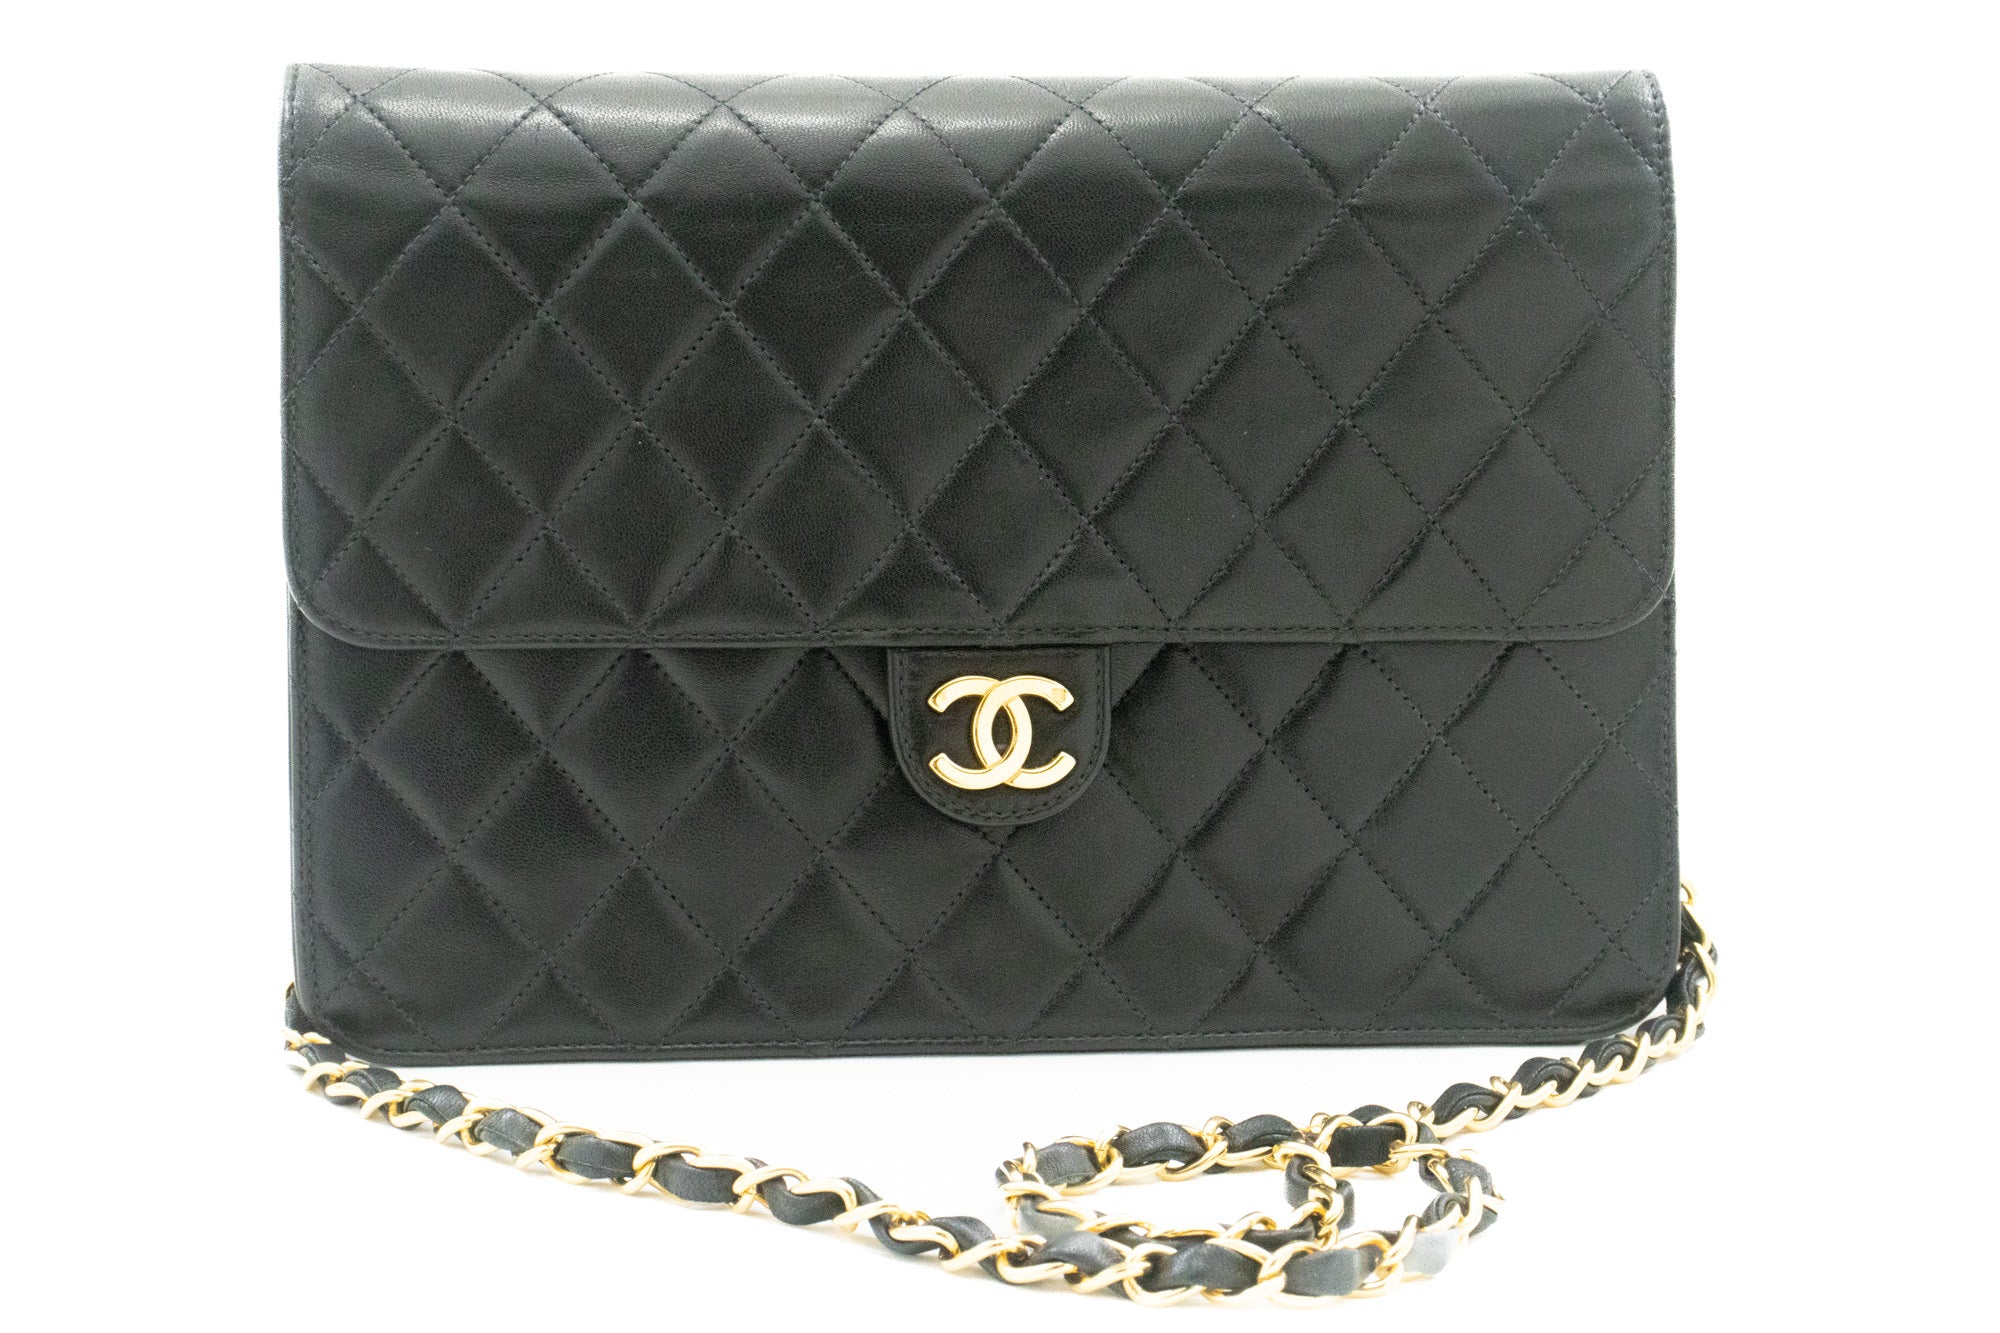 Chanel Black Quilted Lambskin Mini Full Flap Bag Gold Hardware, 2000-2002